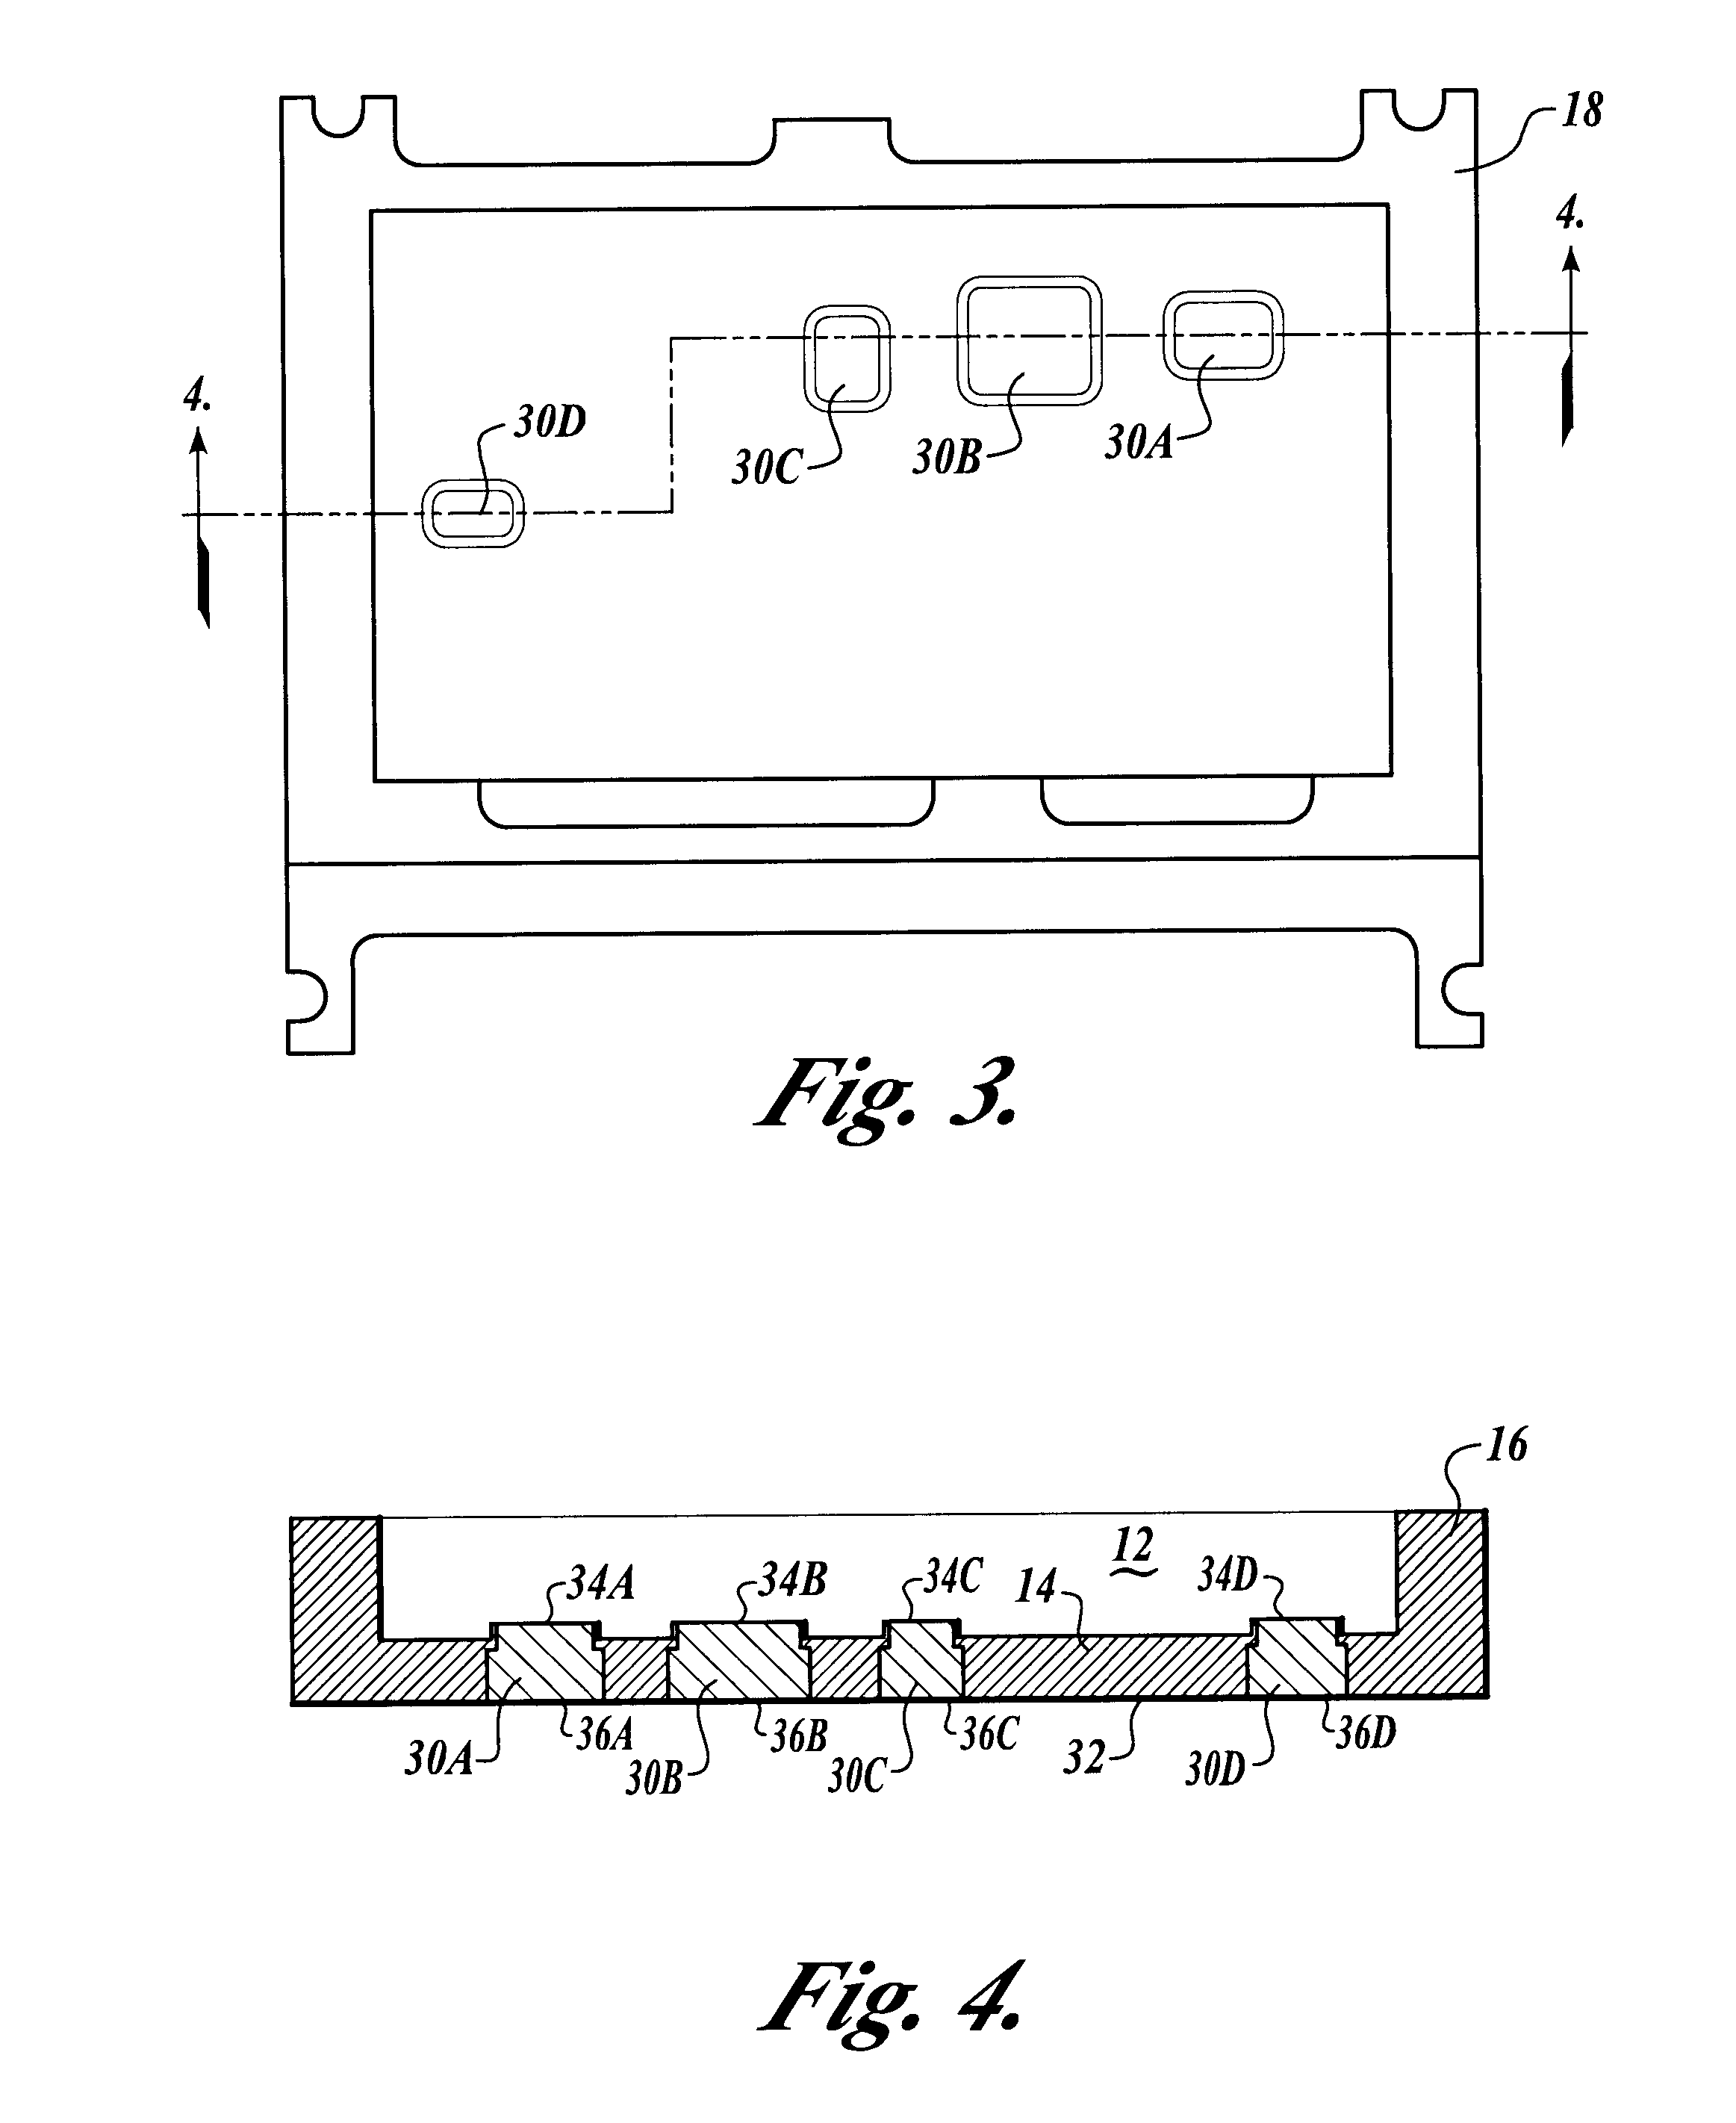 Electronics packages having a composite structure and methods for manufacturing such electronics packages